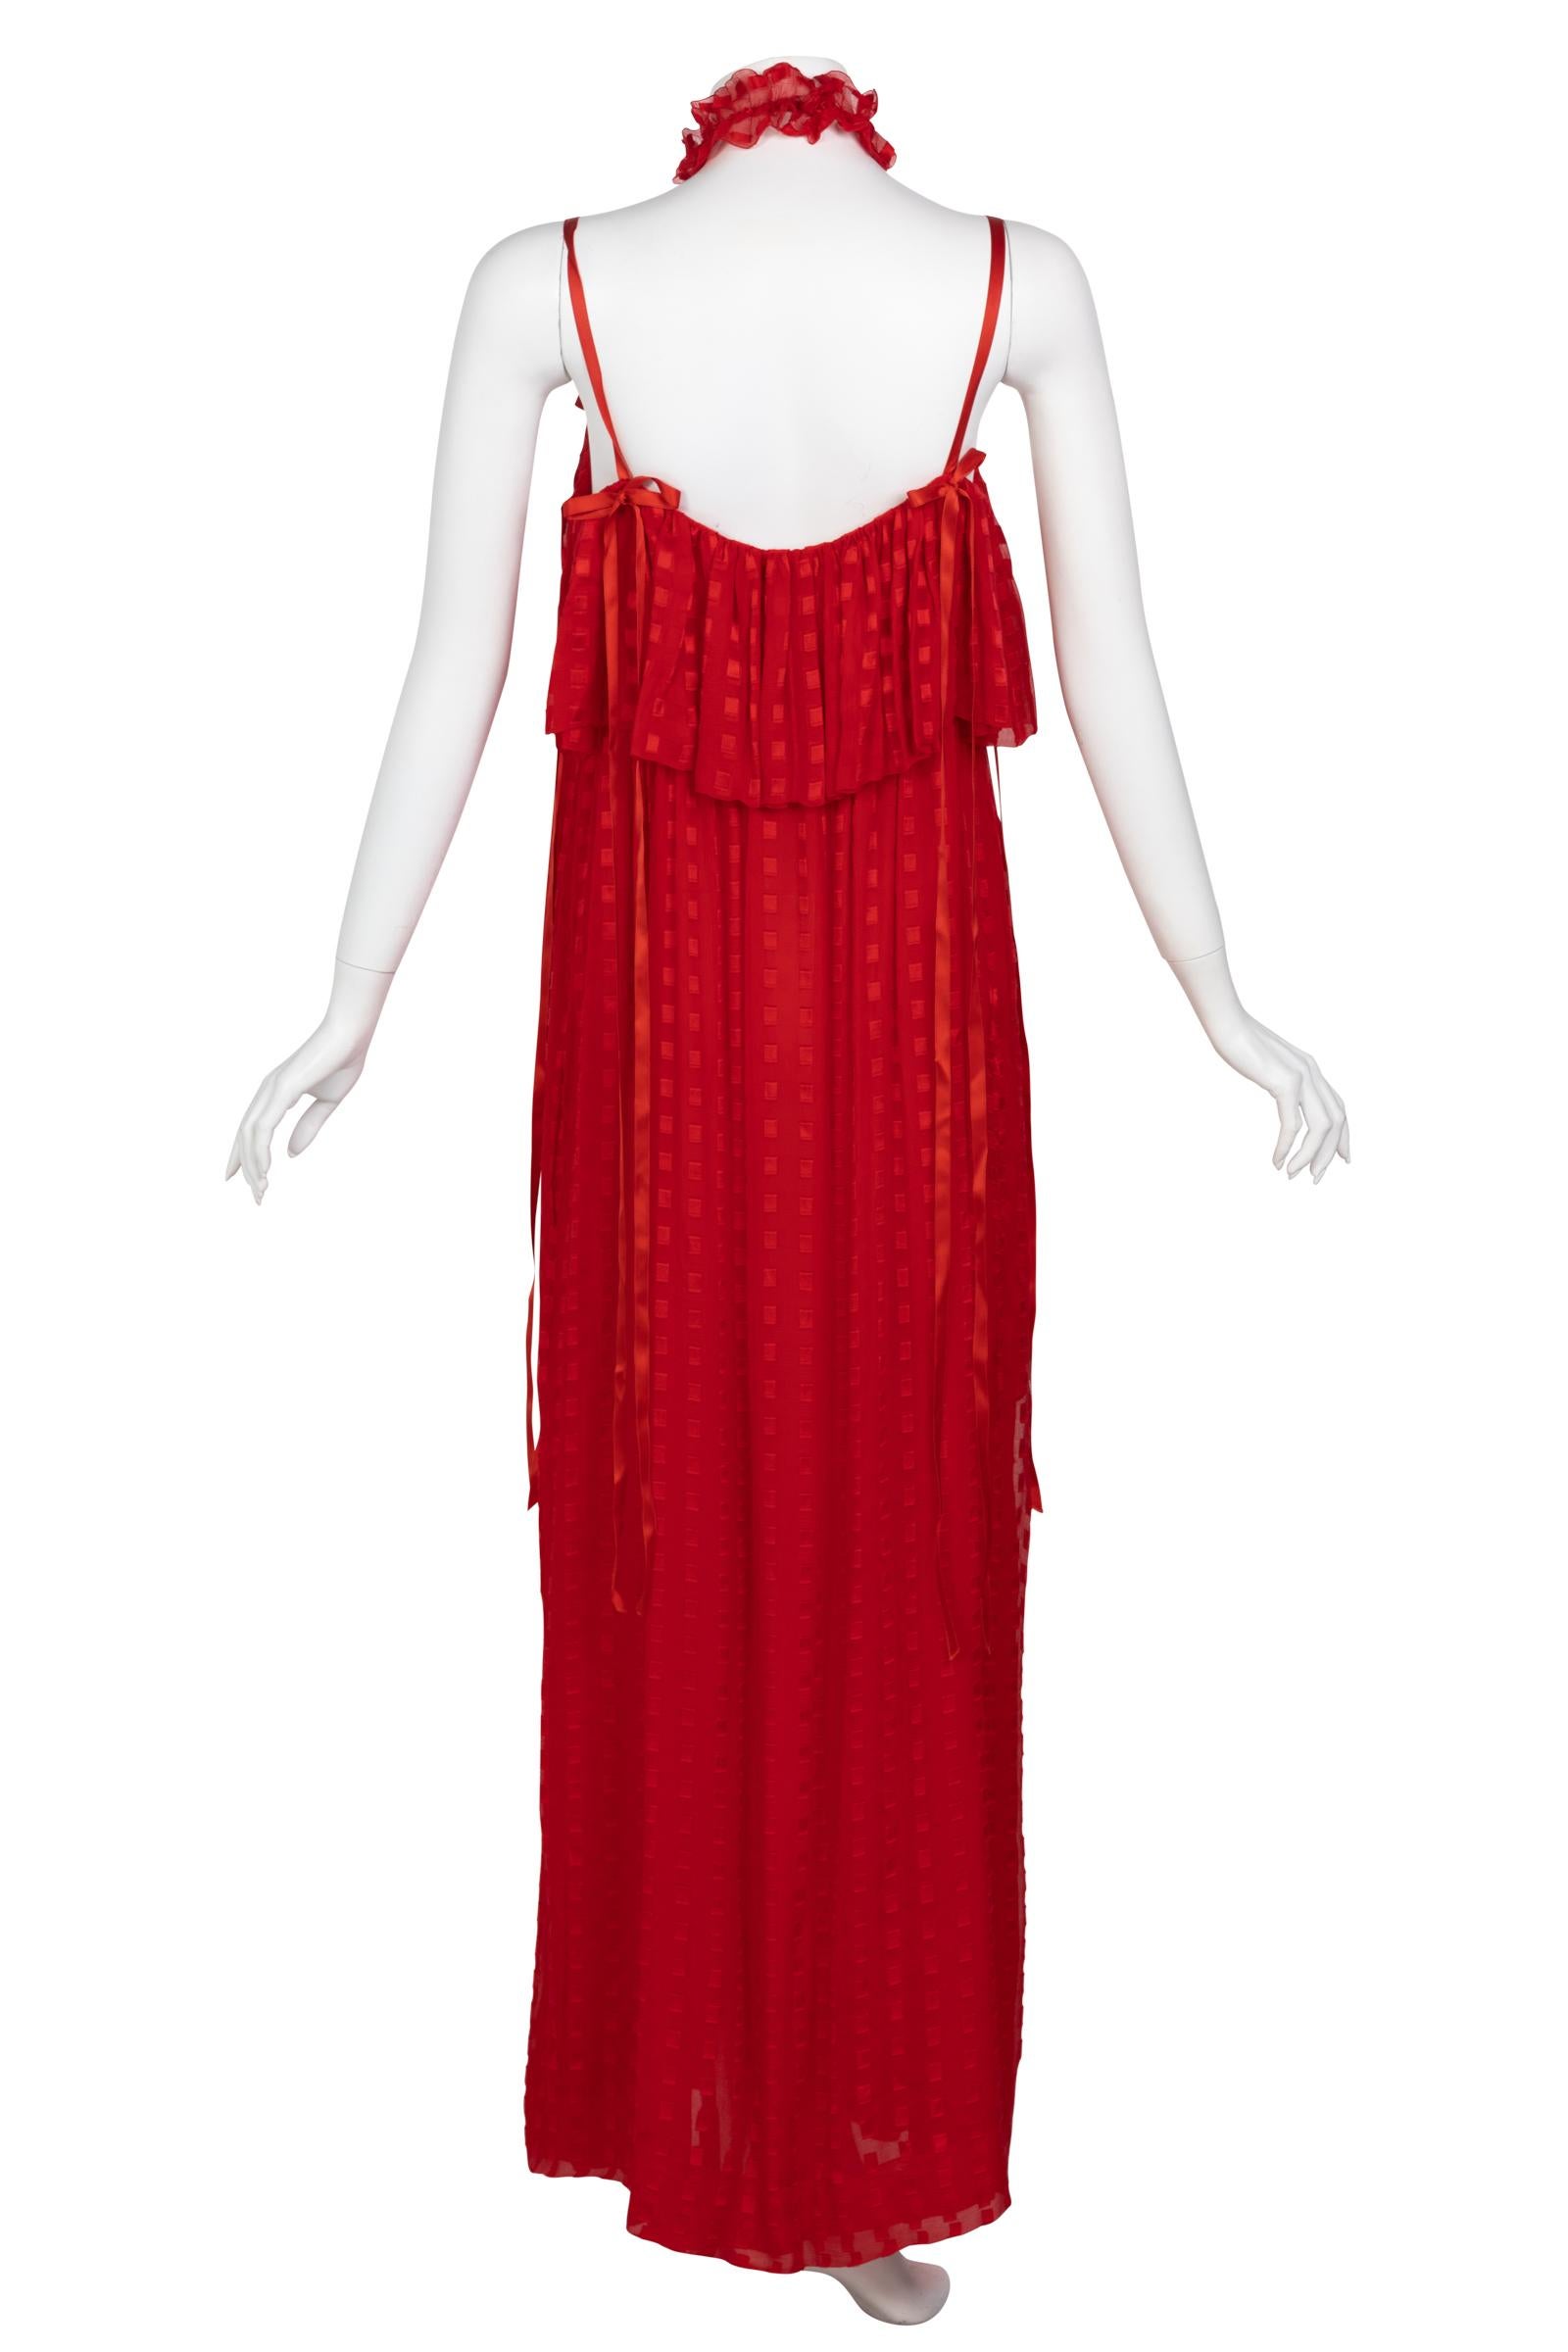 Christian Dior Red Maxi Dress & Shawl Documented 1970s 2